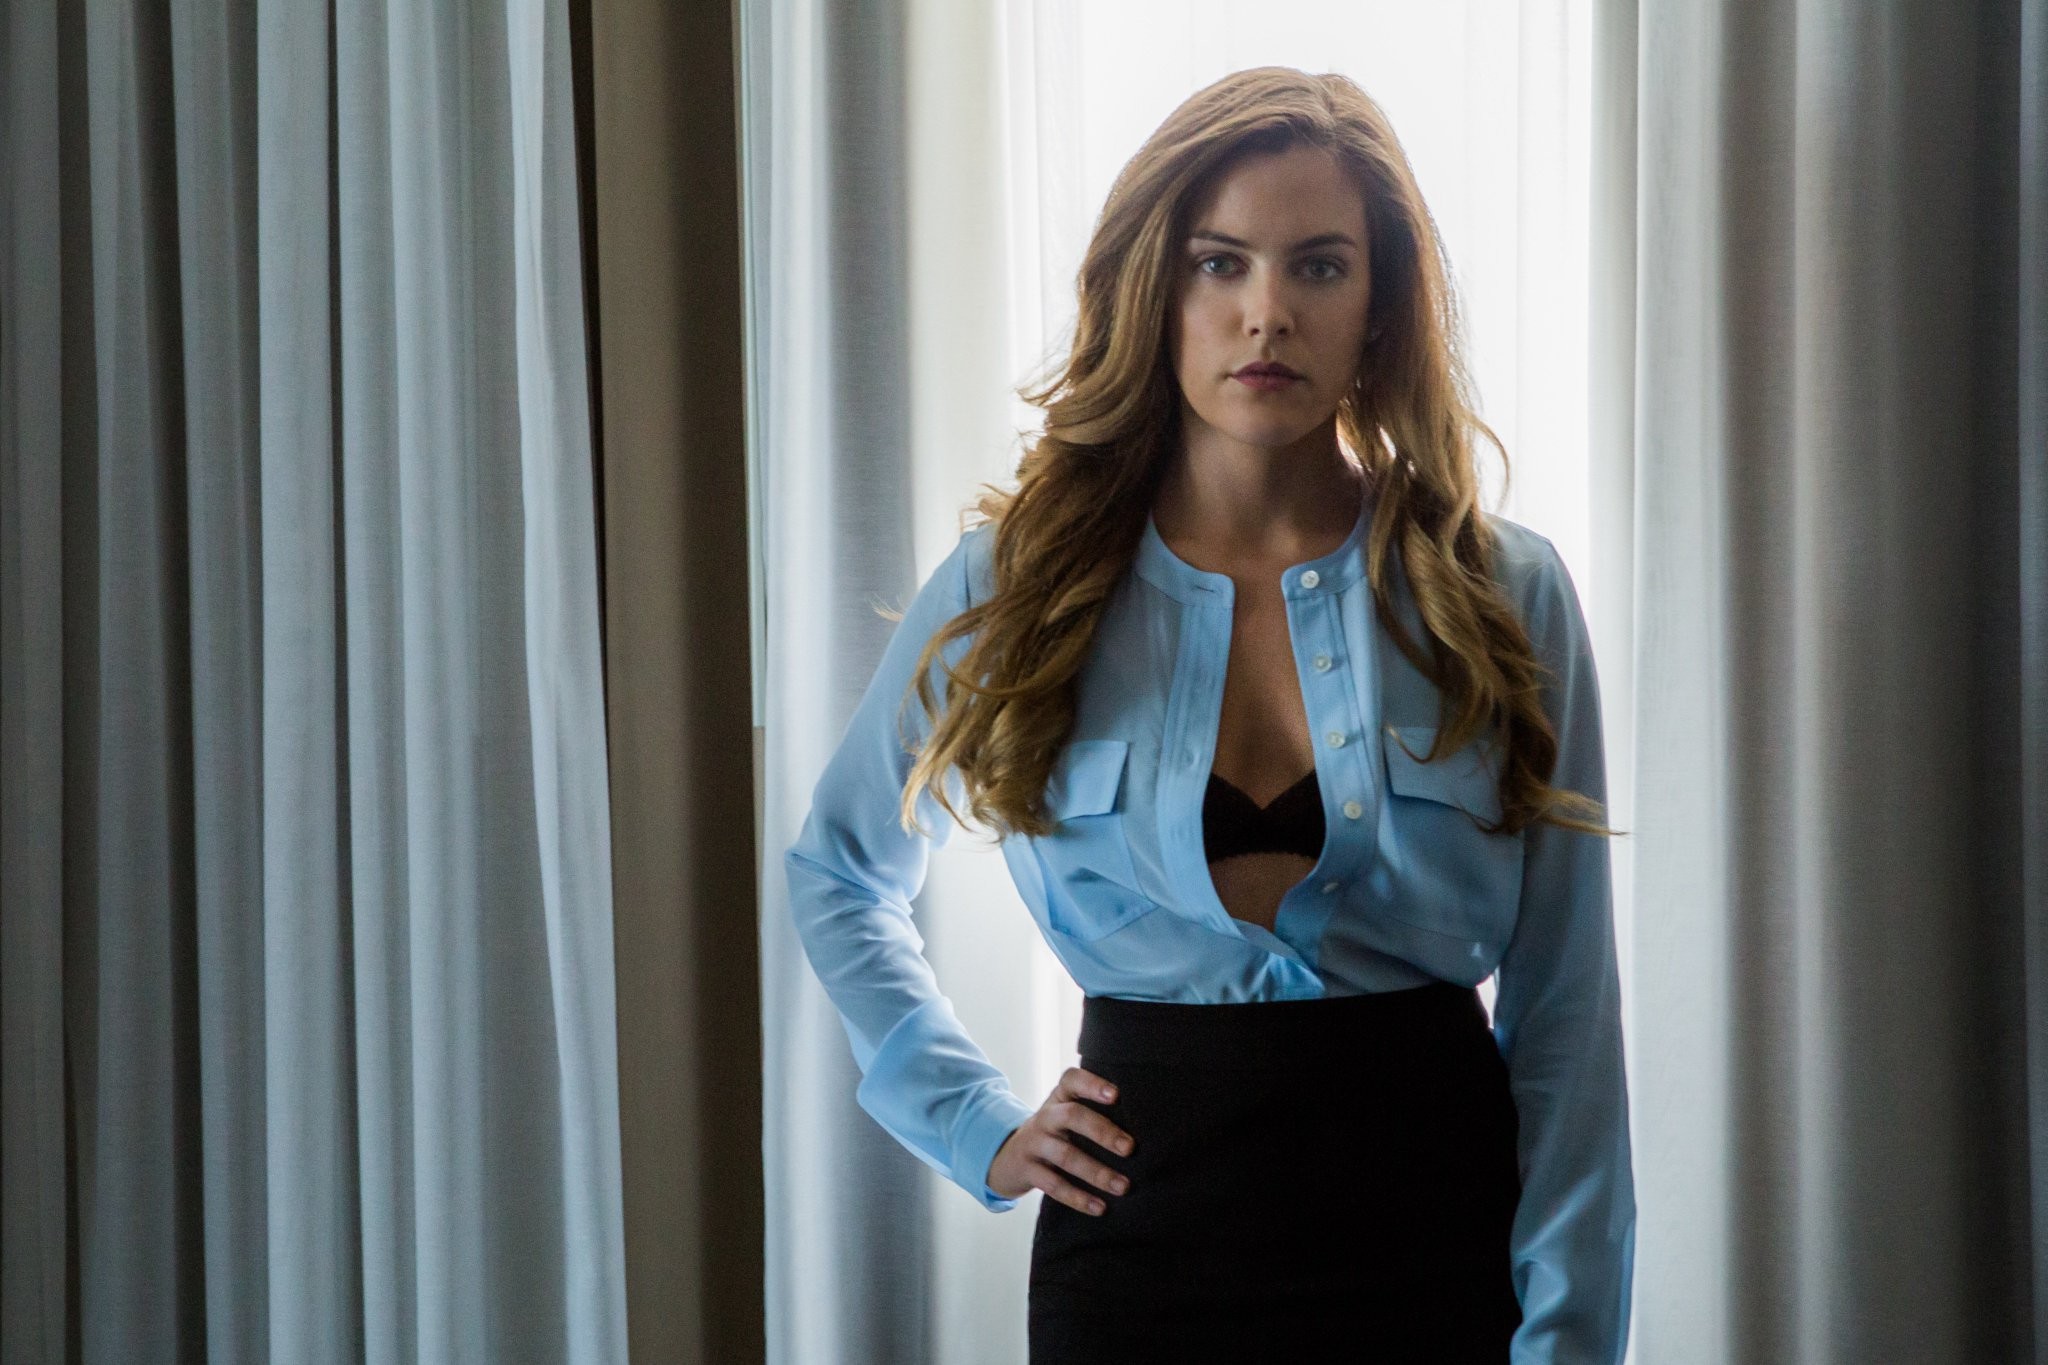 Riley Keough, The Girlfriend Experience It got me thinking a lot about